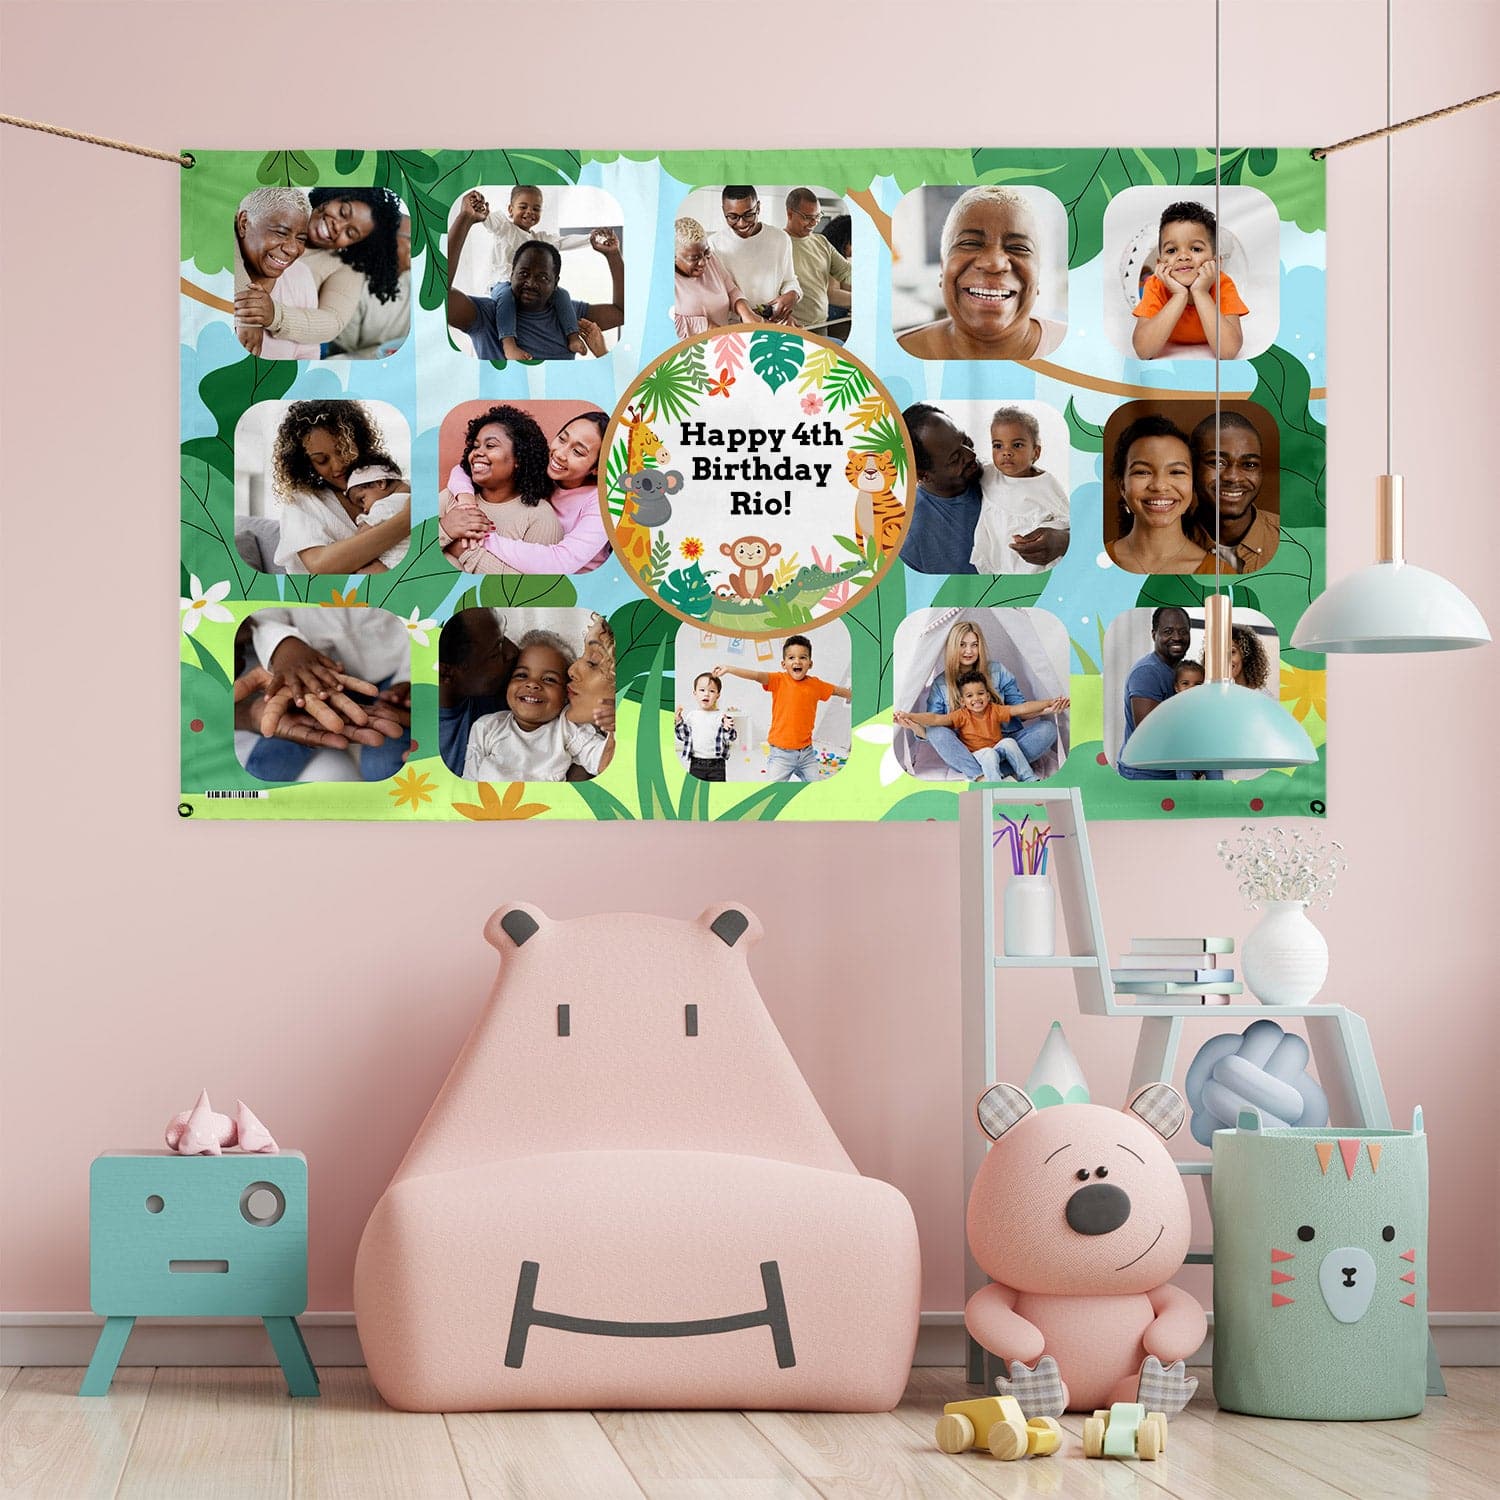 Kids Photo Banner - Jungle - Add Any Text - 5FT X 3FT